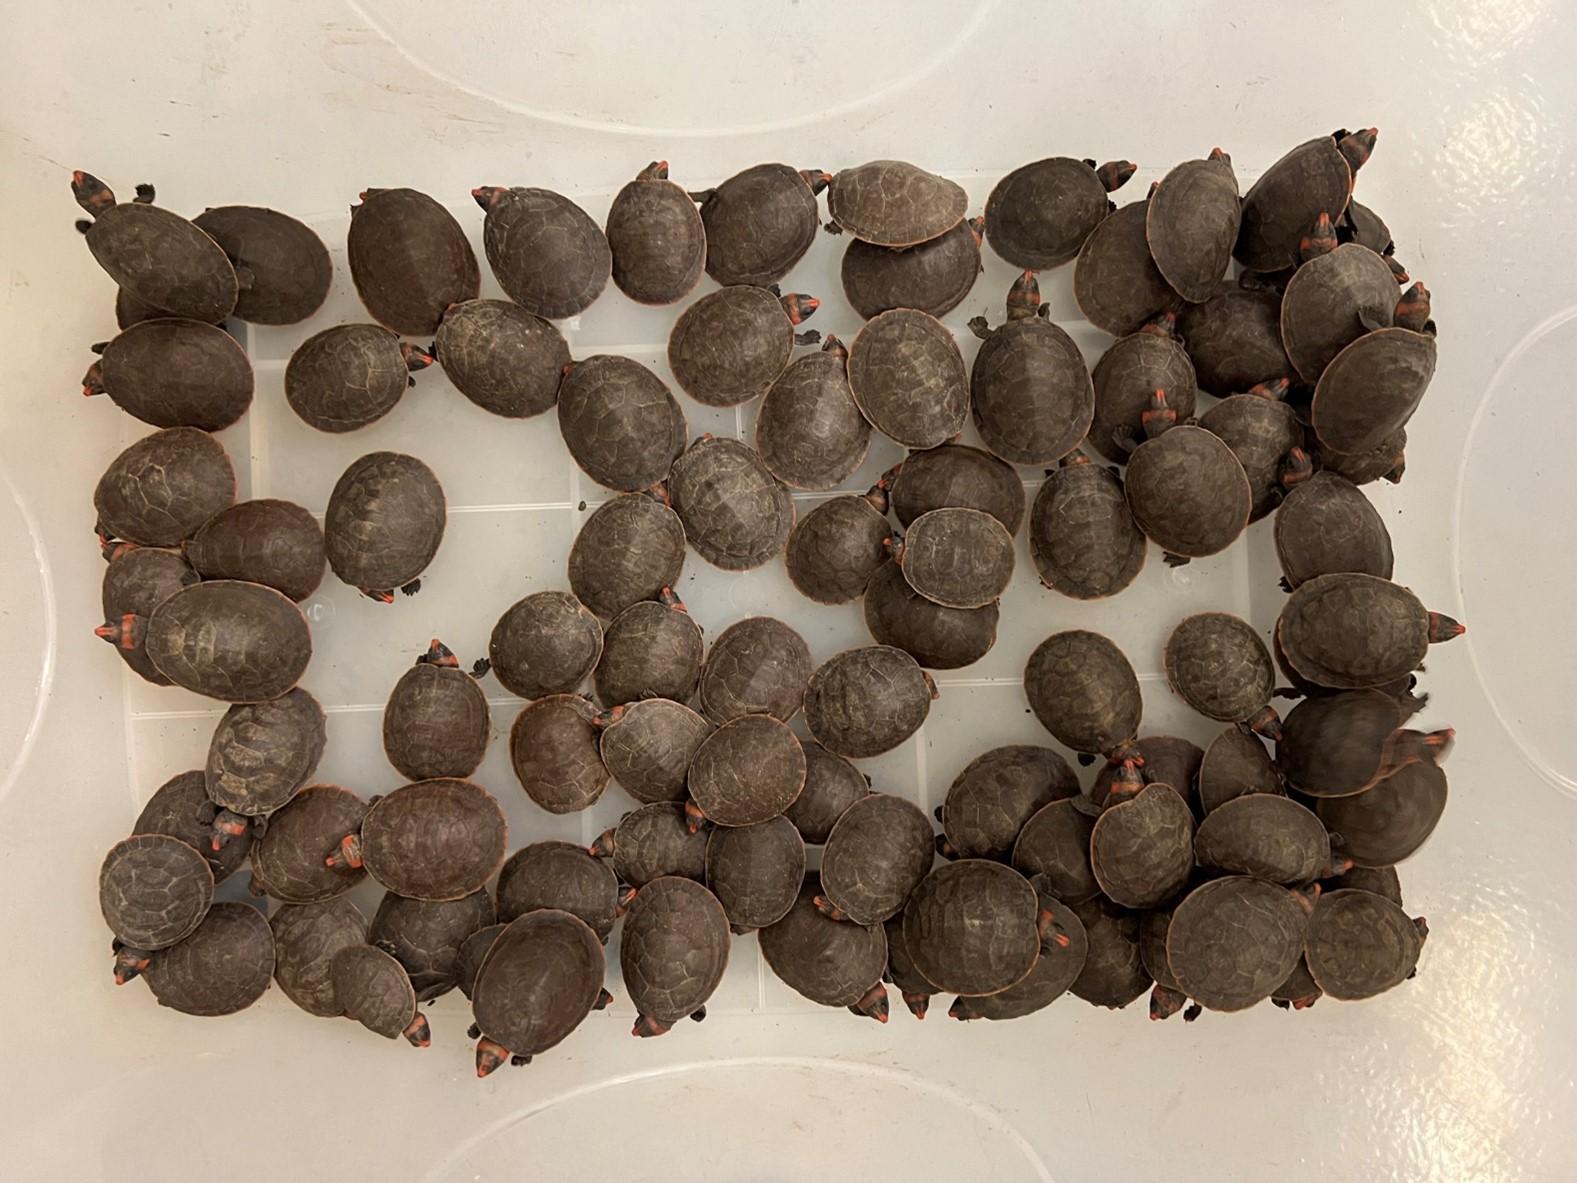 The Agriculture, Fisheries and Conservation Department seized a total of 492 endangered red-headed Amazon river turtles (Podocnemis erythrocephala) suspected to be illegally imported at Hong Kong International Airport on December 11. Photo shows some of the seized red-headed Amazon river turtles.